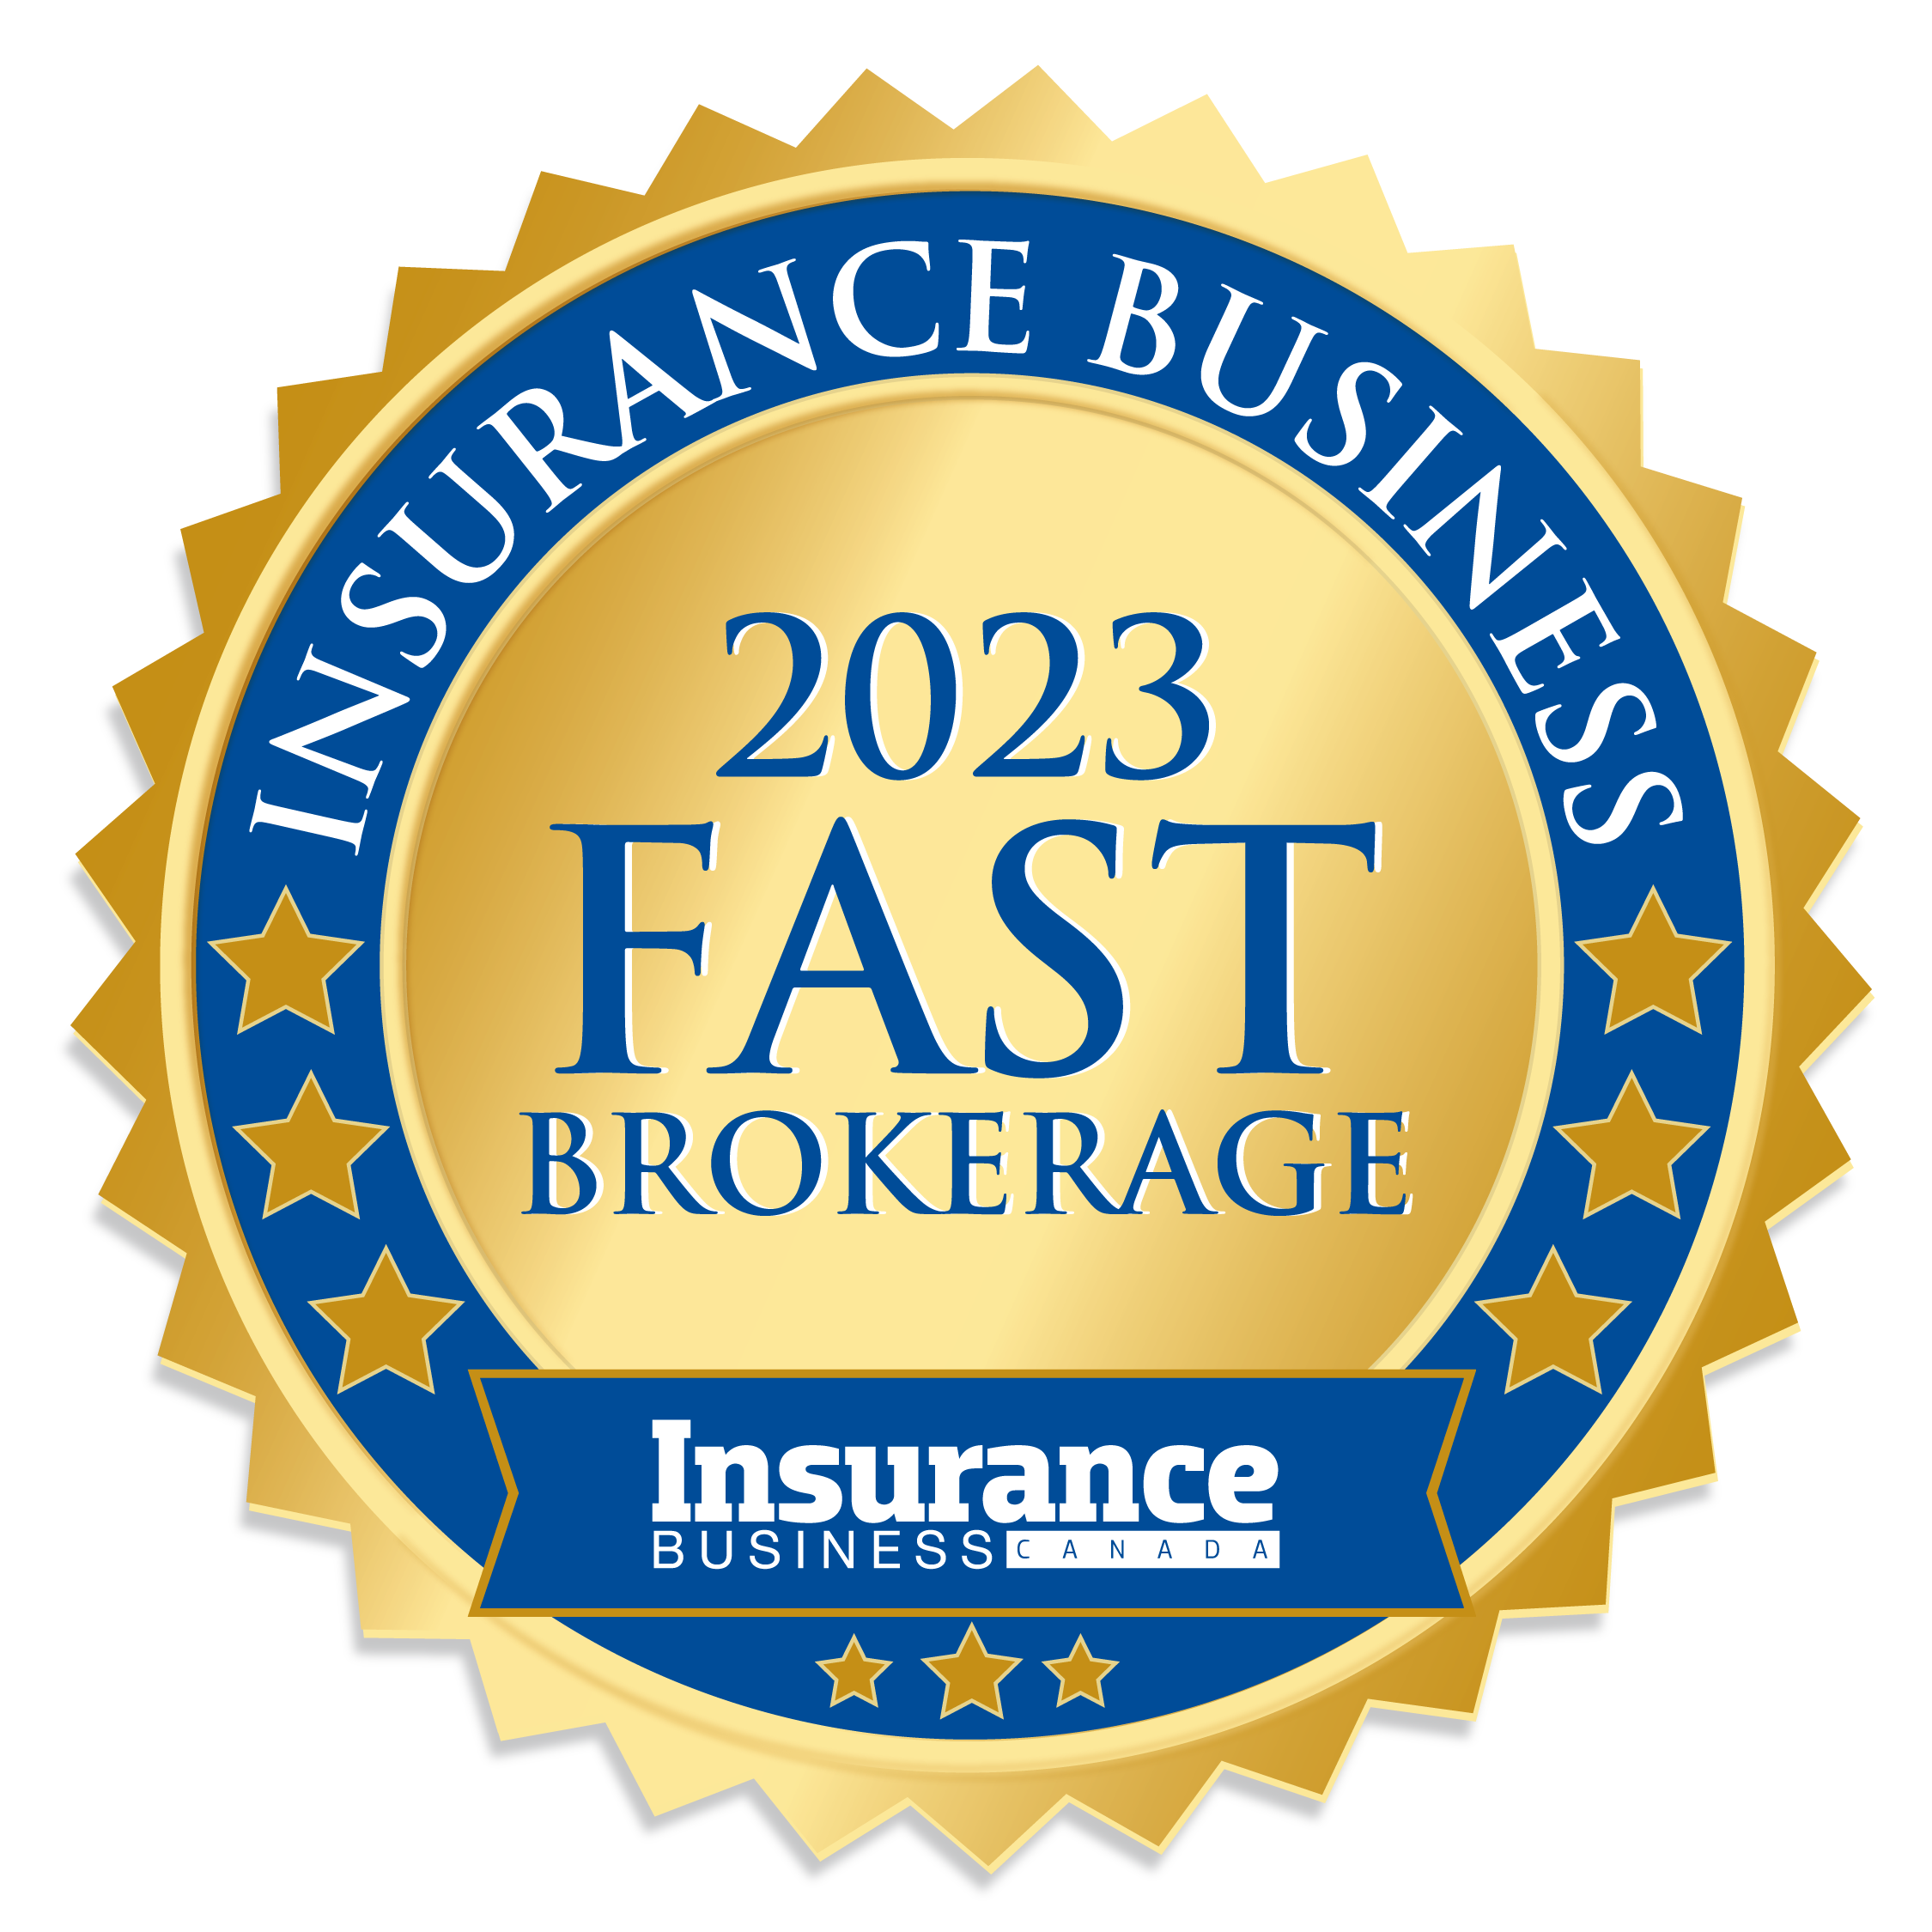 Insurance Business Canada Awards 2023 Medal for FAST Brokerage